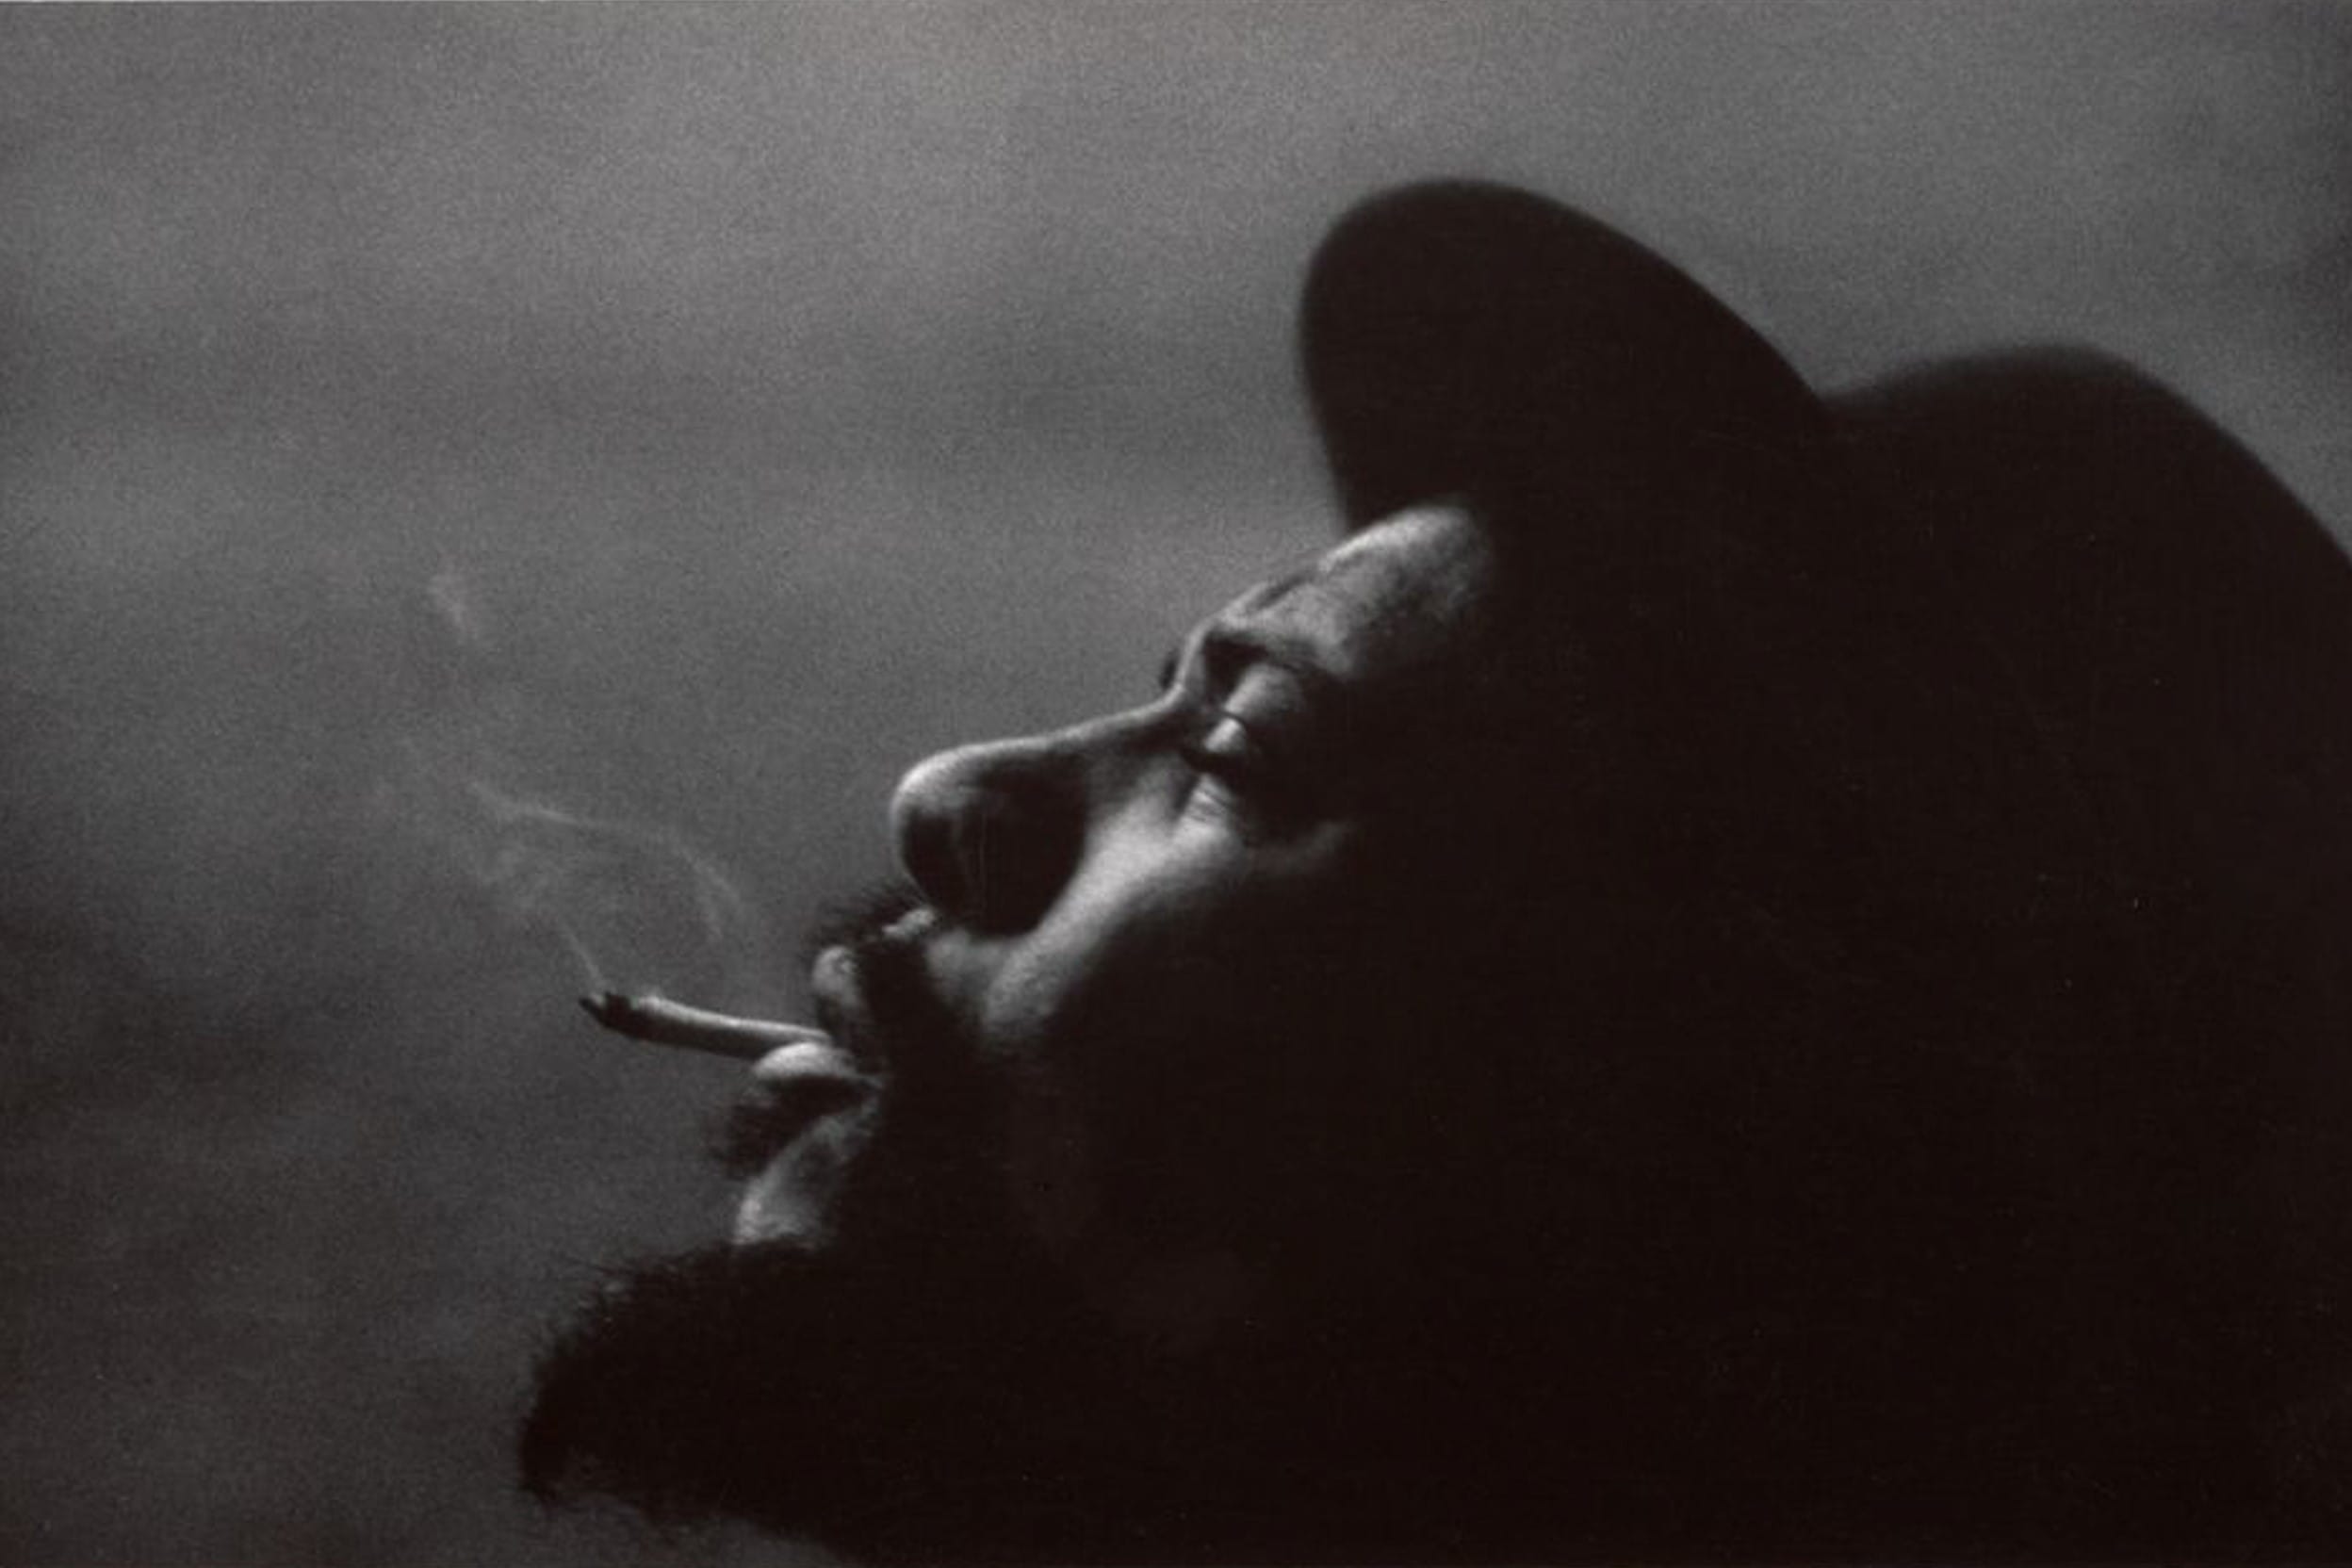 W. Eugene Smith. Thelonious Monk rehearsing in the loft, 1959 2